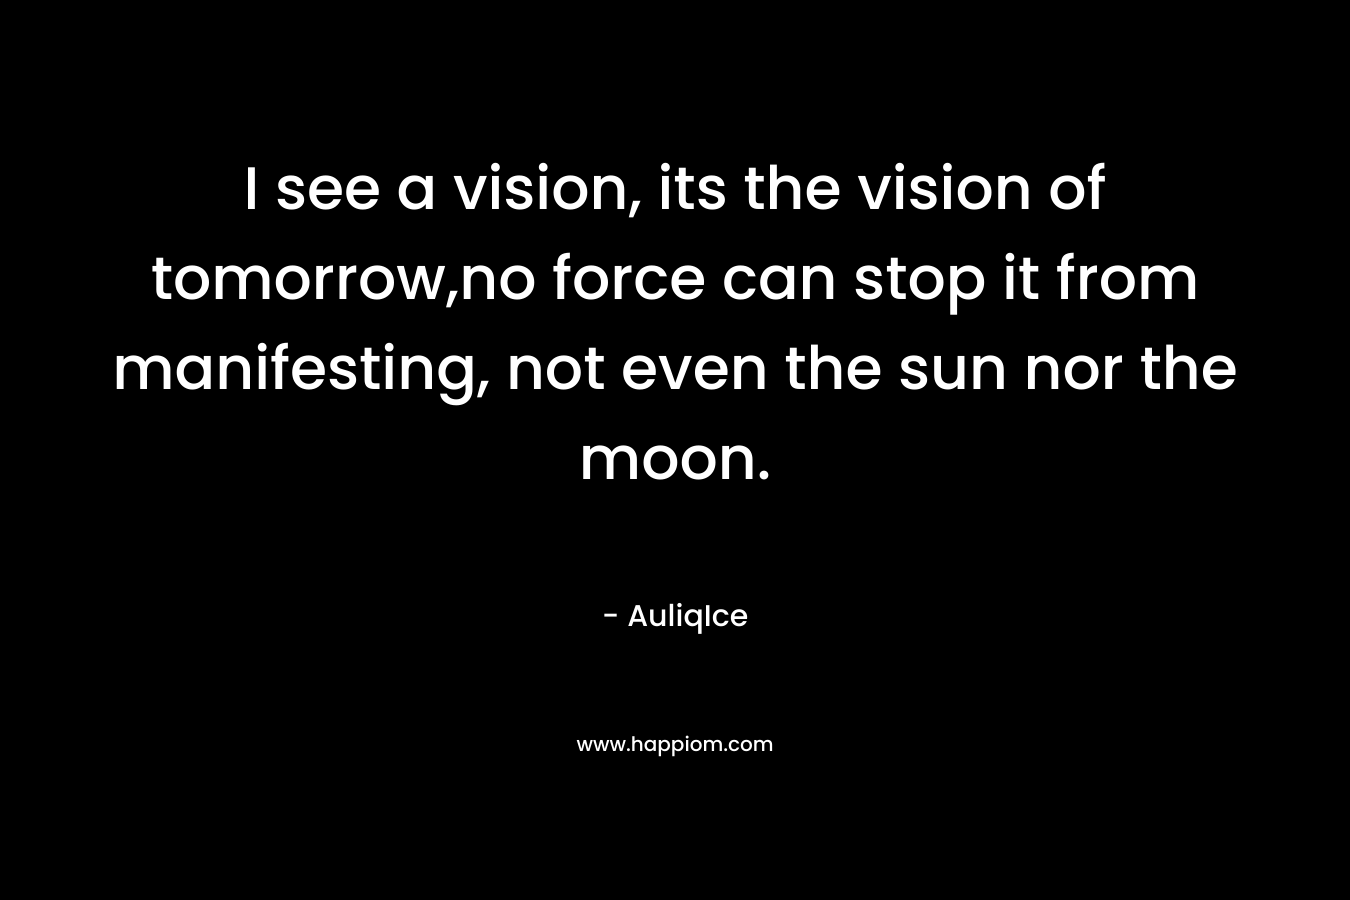 I see a vision, its the vision of tomorrow,no force can stop it from manifesting, not even the sun nor the moon. – AuliqIce